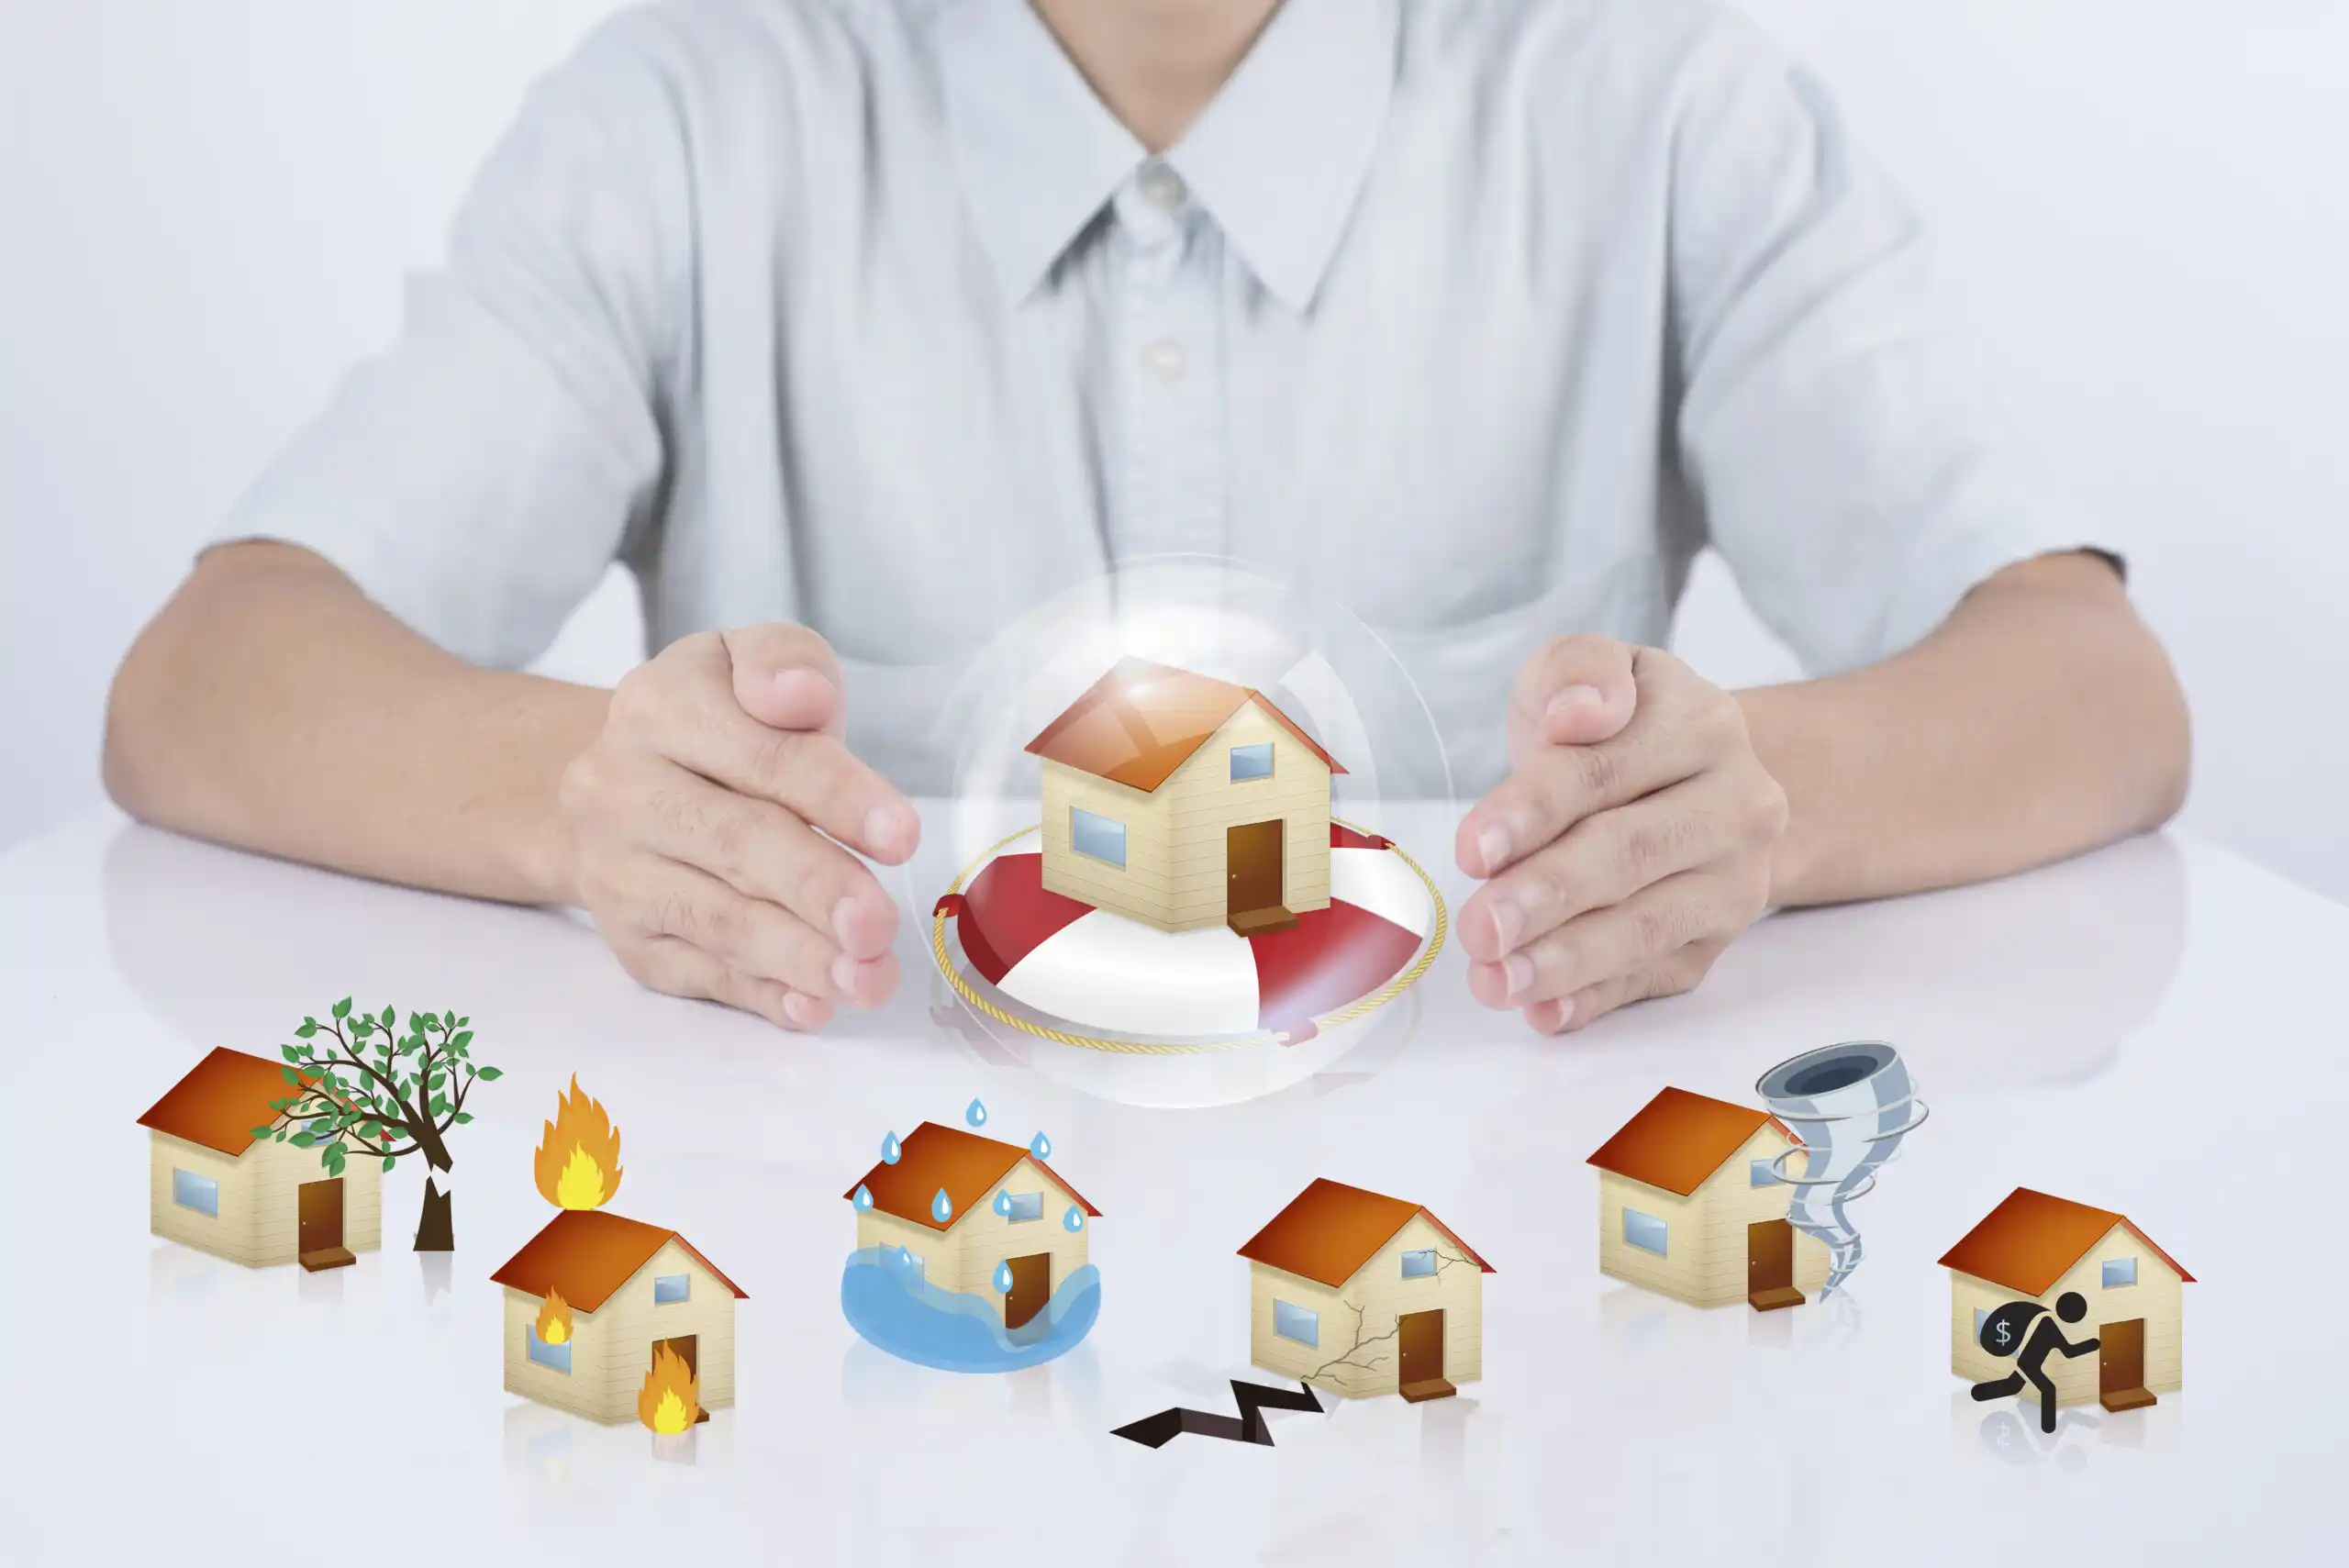 The Best Home Insurance Plans for 2020